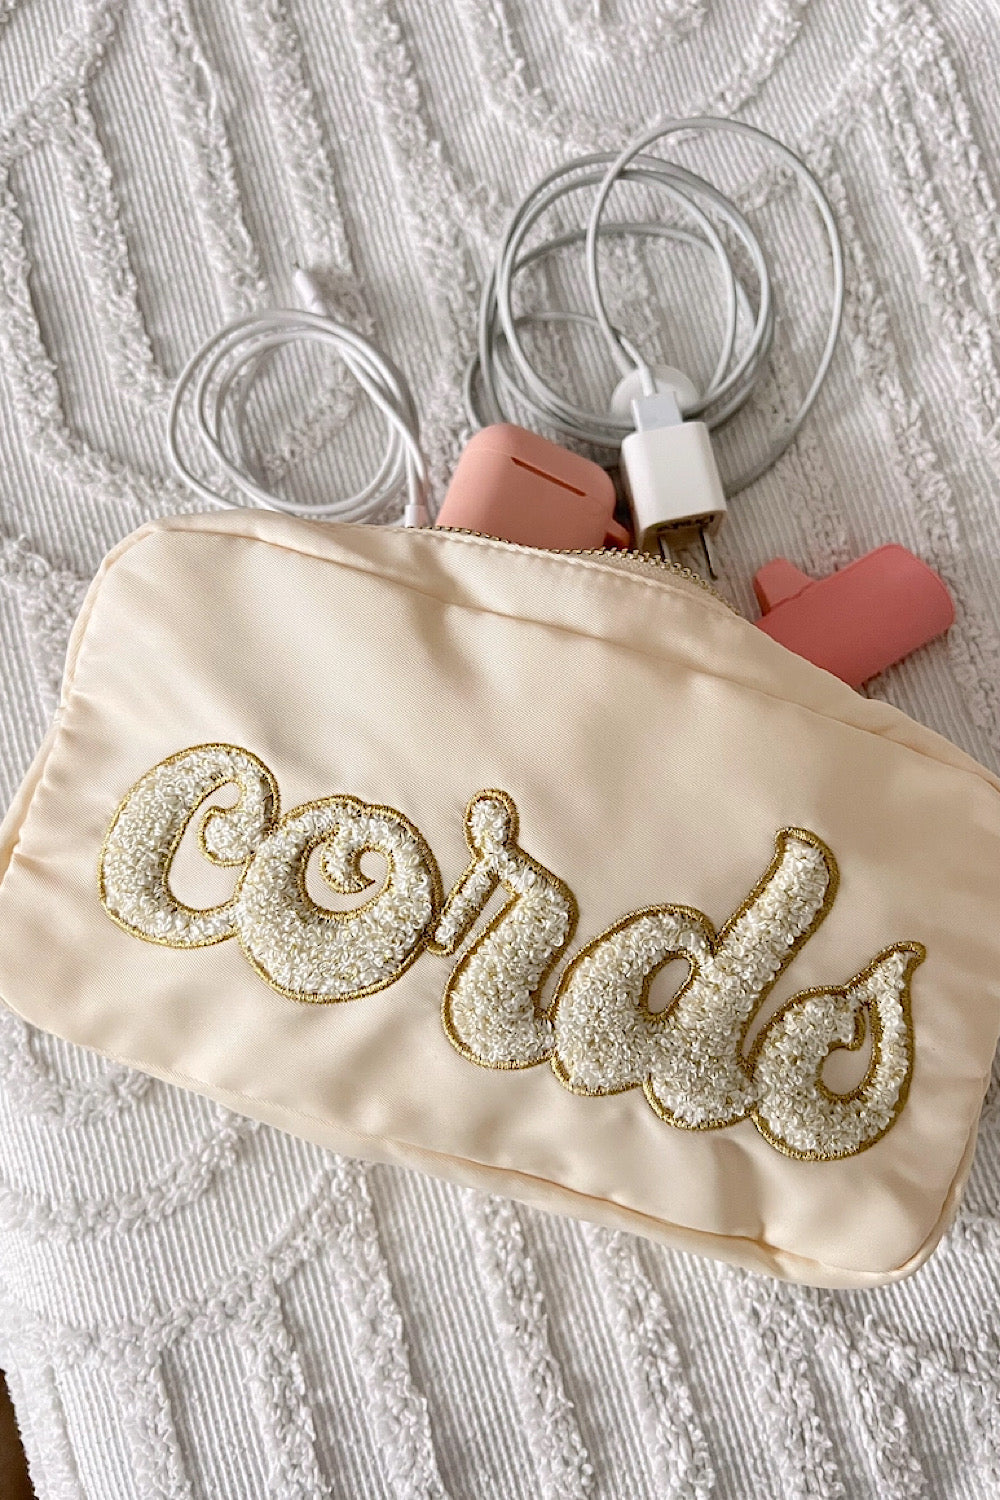 CORDS POUCH IN NUDE